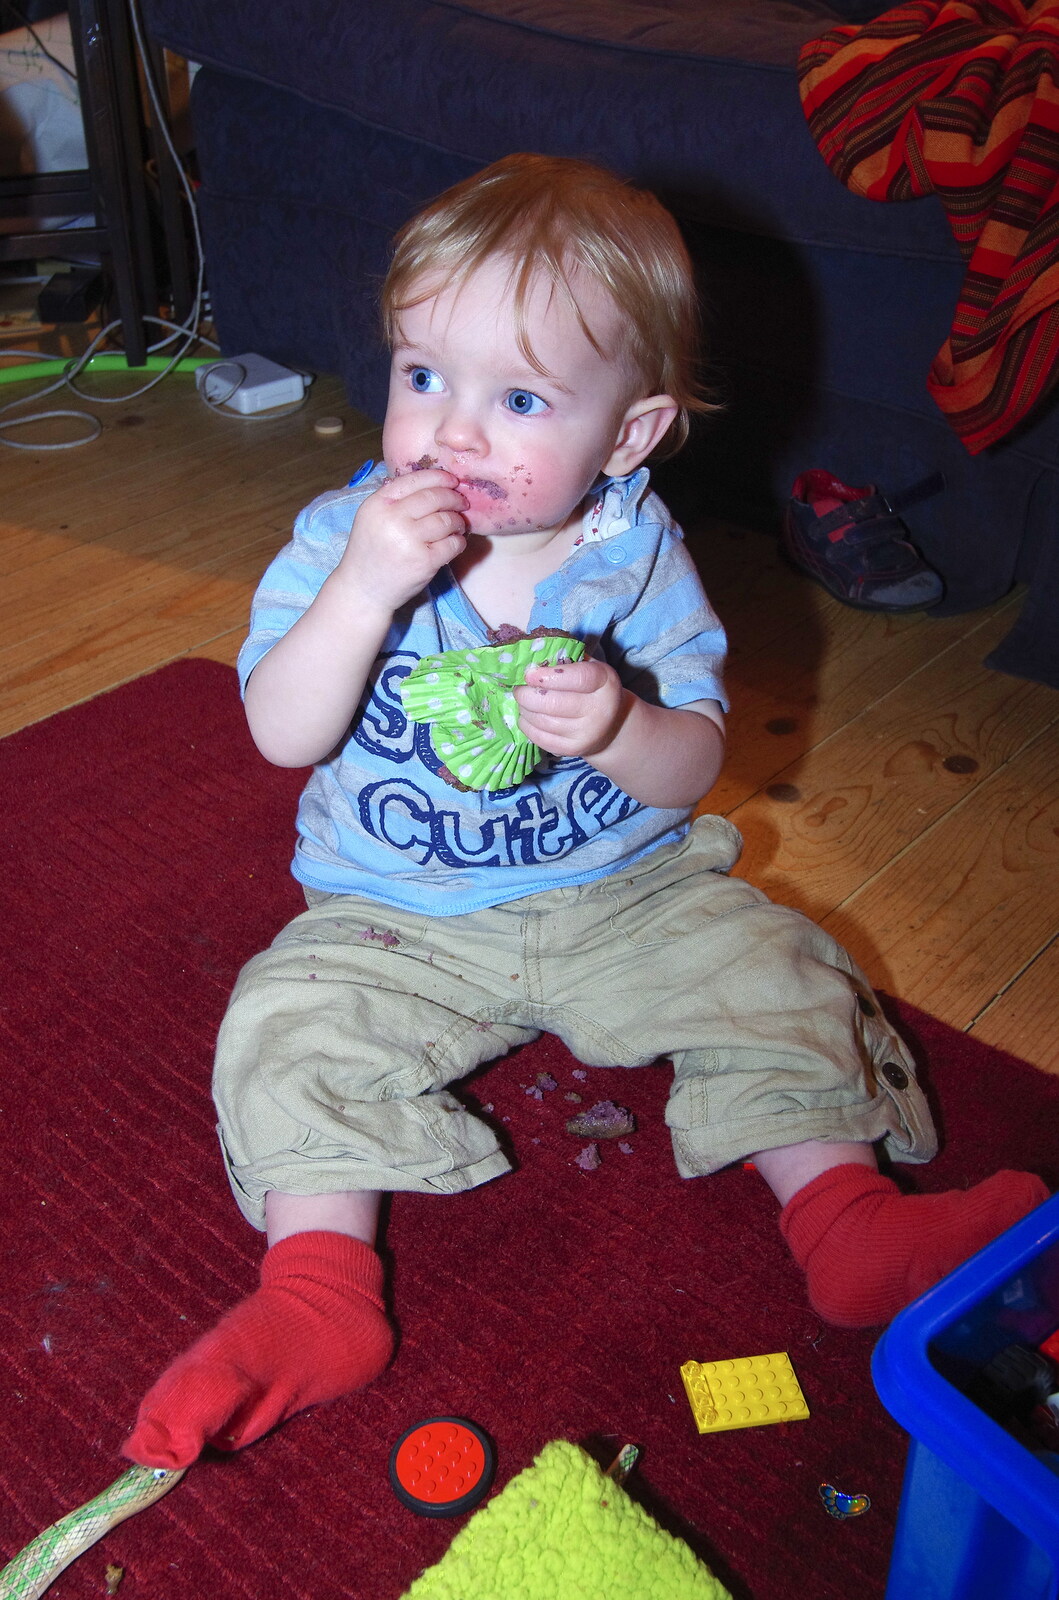 Caught: Baby Gabey eats a cup-cake from An Easter Visit from Da Gorls, Brome, Suffolk - 2nd April 2013